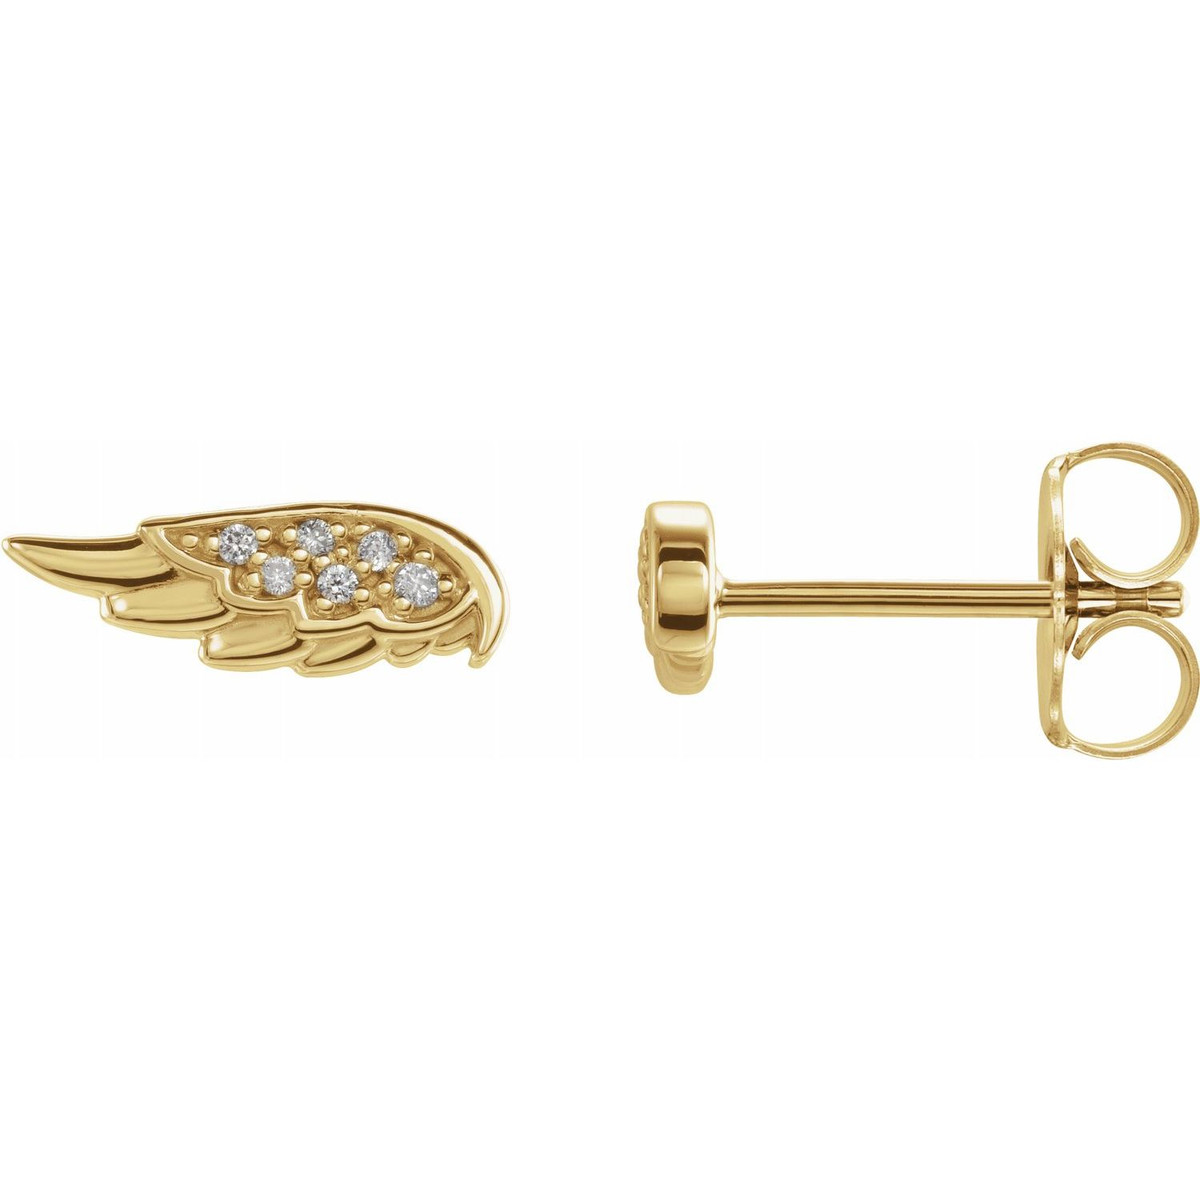 Hyde Park Collection 14K Yellow Gold Angel Wing Diamond Earrings-26031 Product Image